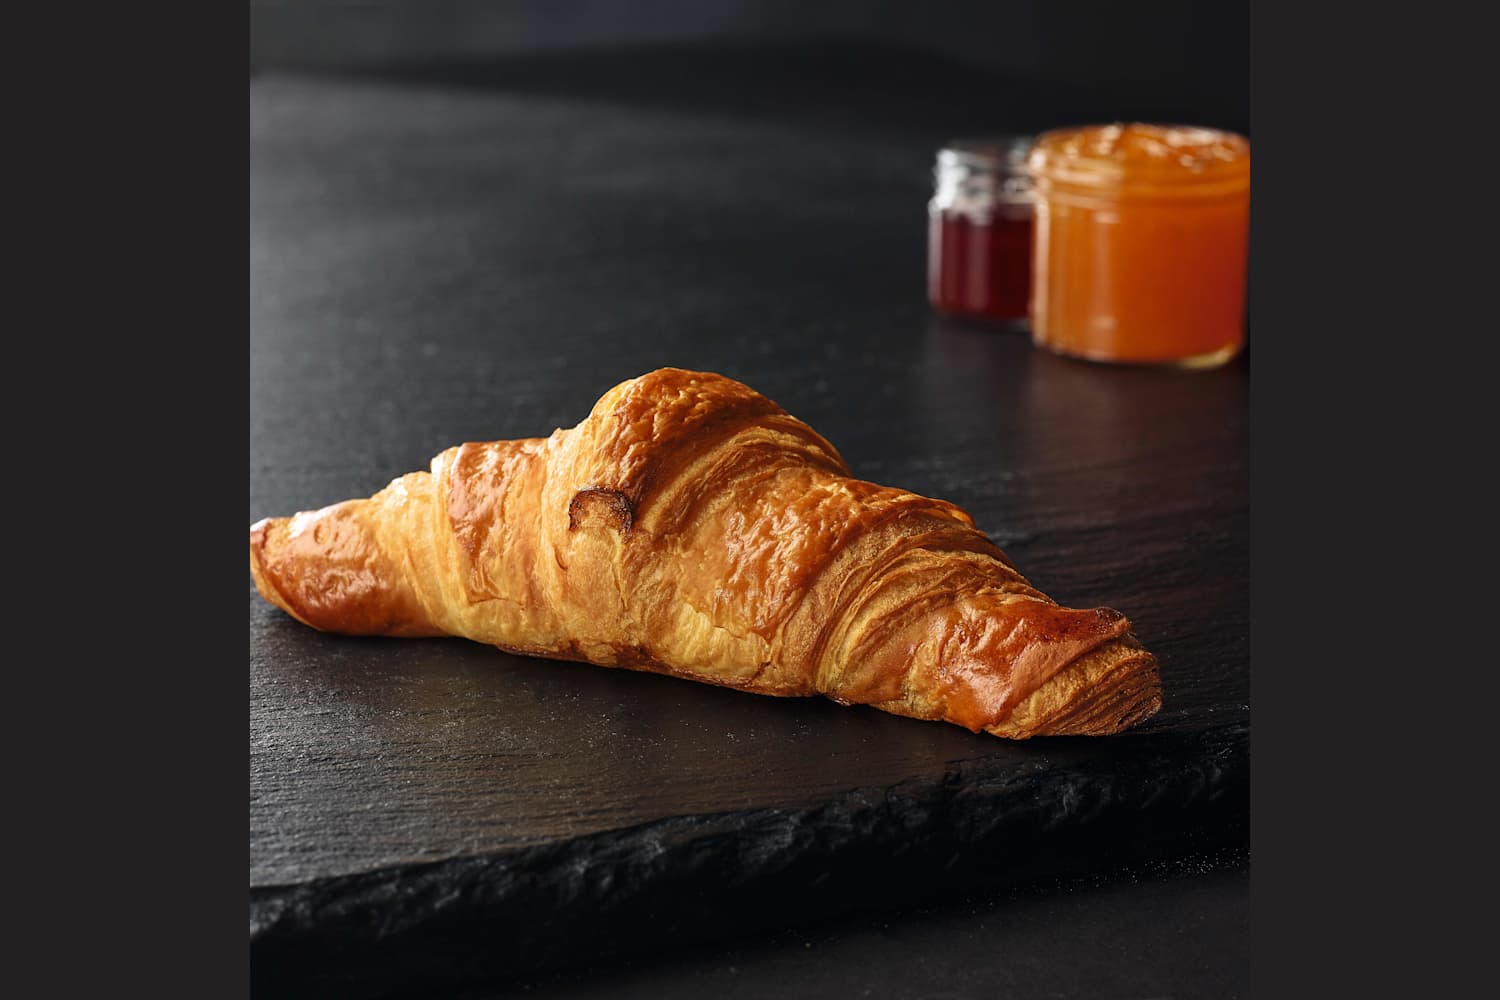 2 x Croissant / Chocolate Croissant - exclusive deal at Paul Bakery - Get Deals, Cashback and Rewards with ShopBack GO